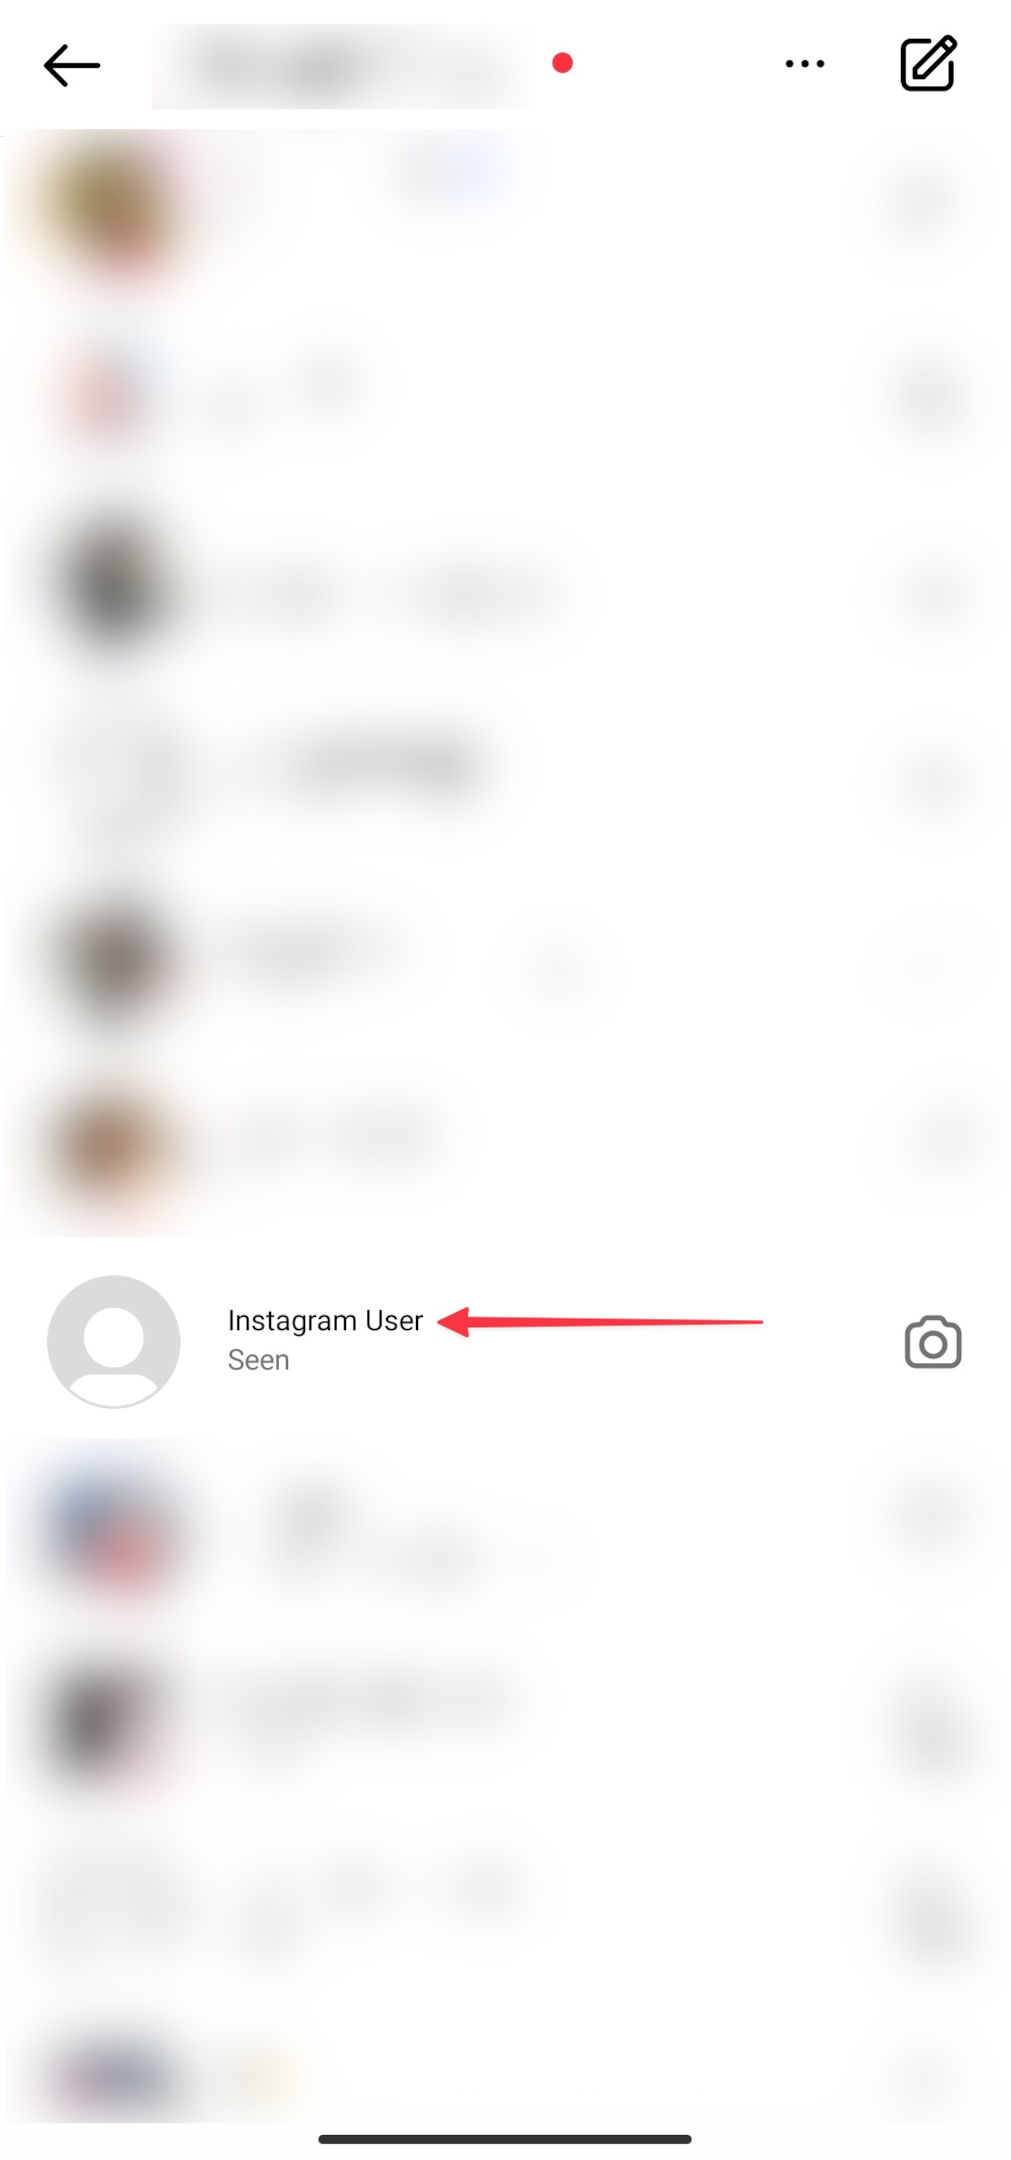 Remote.tools shows how an inactive profile on Instagram looks like